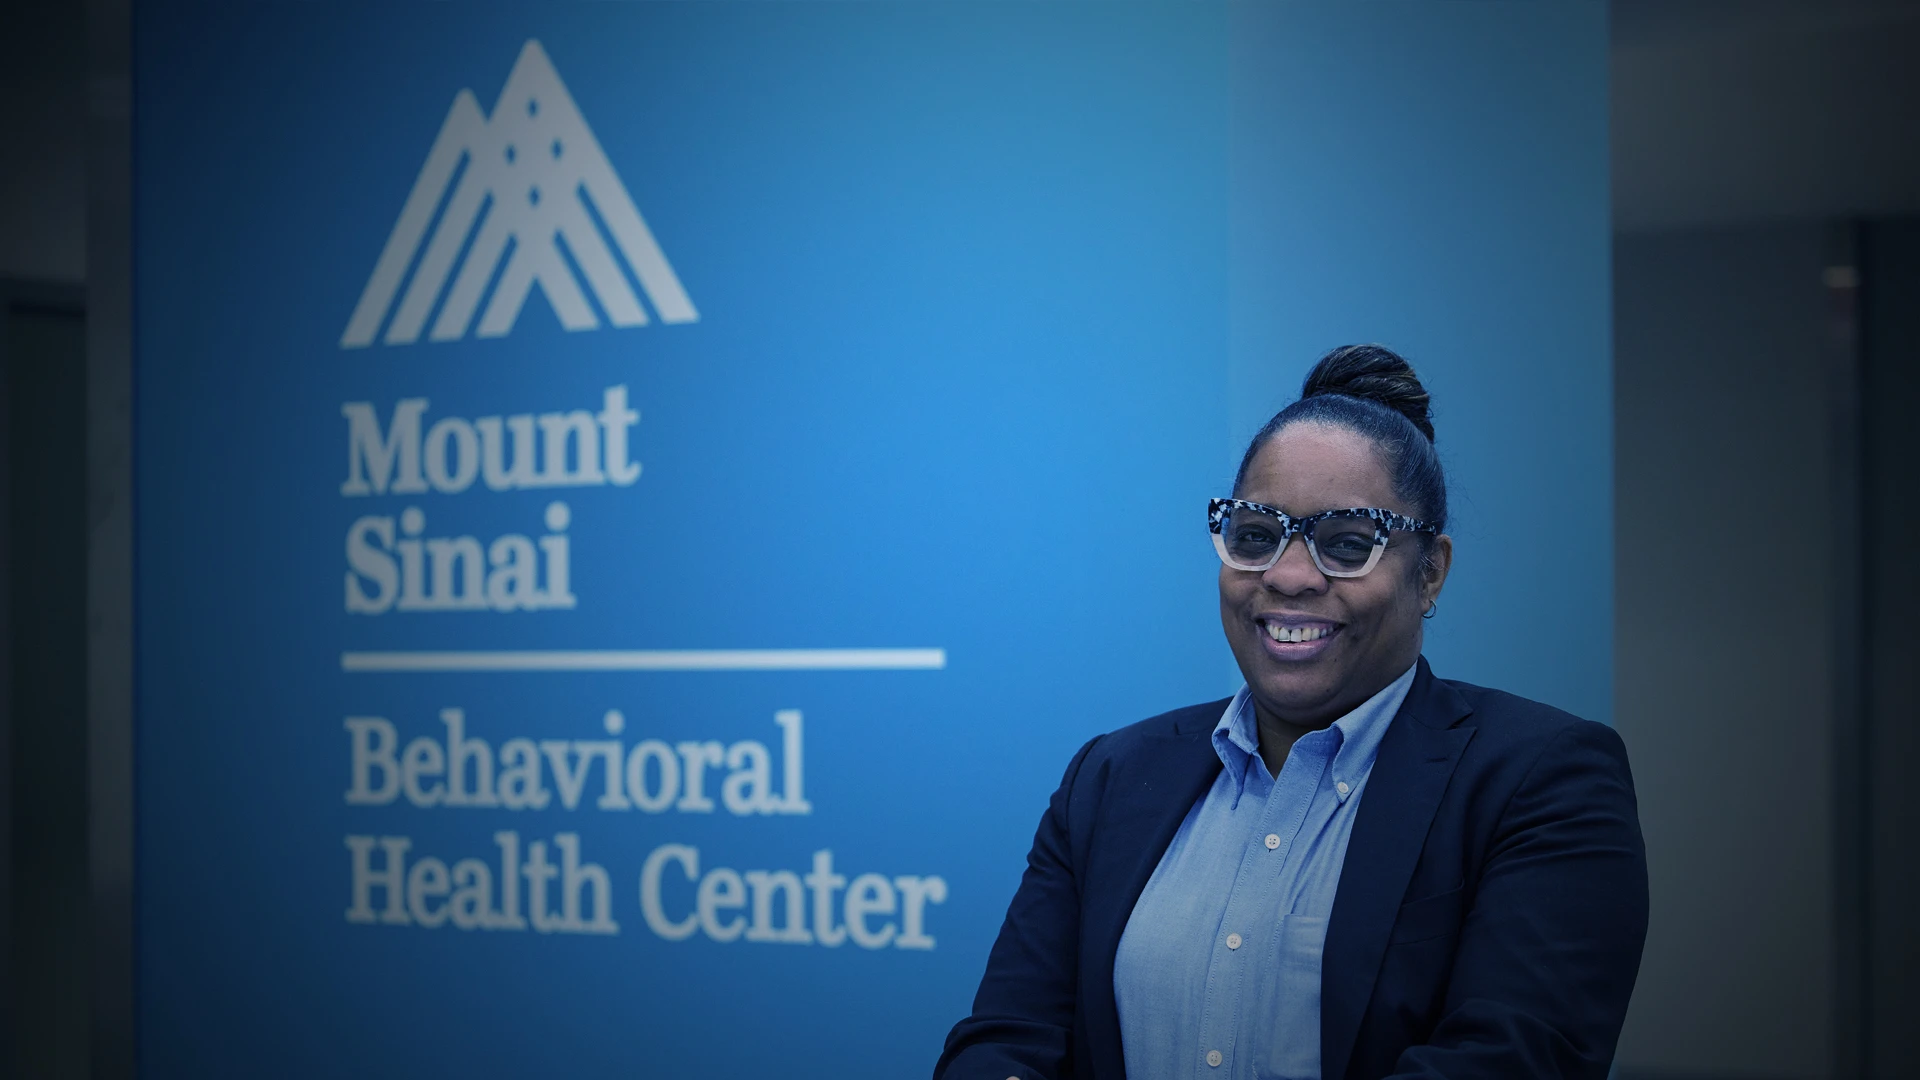 Introducing Mount Sinai-Behavioral Health Center: Integrating Mental Health, Substance Use, and Primary Care Services